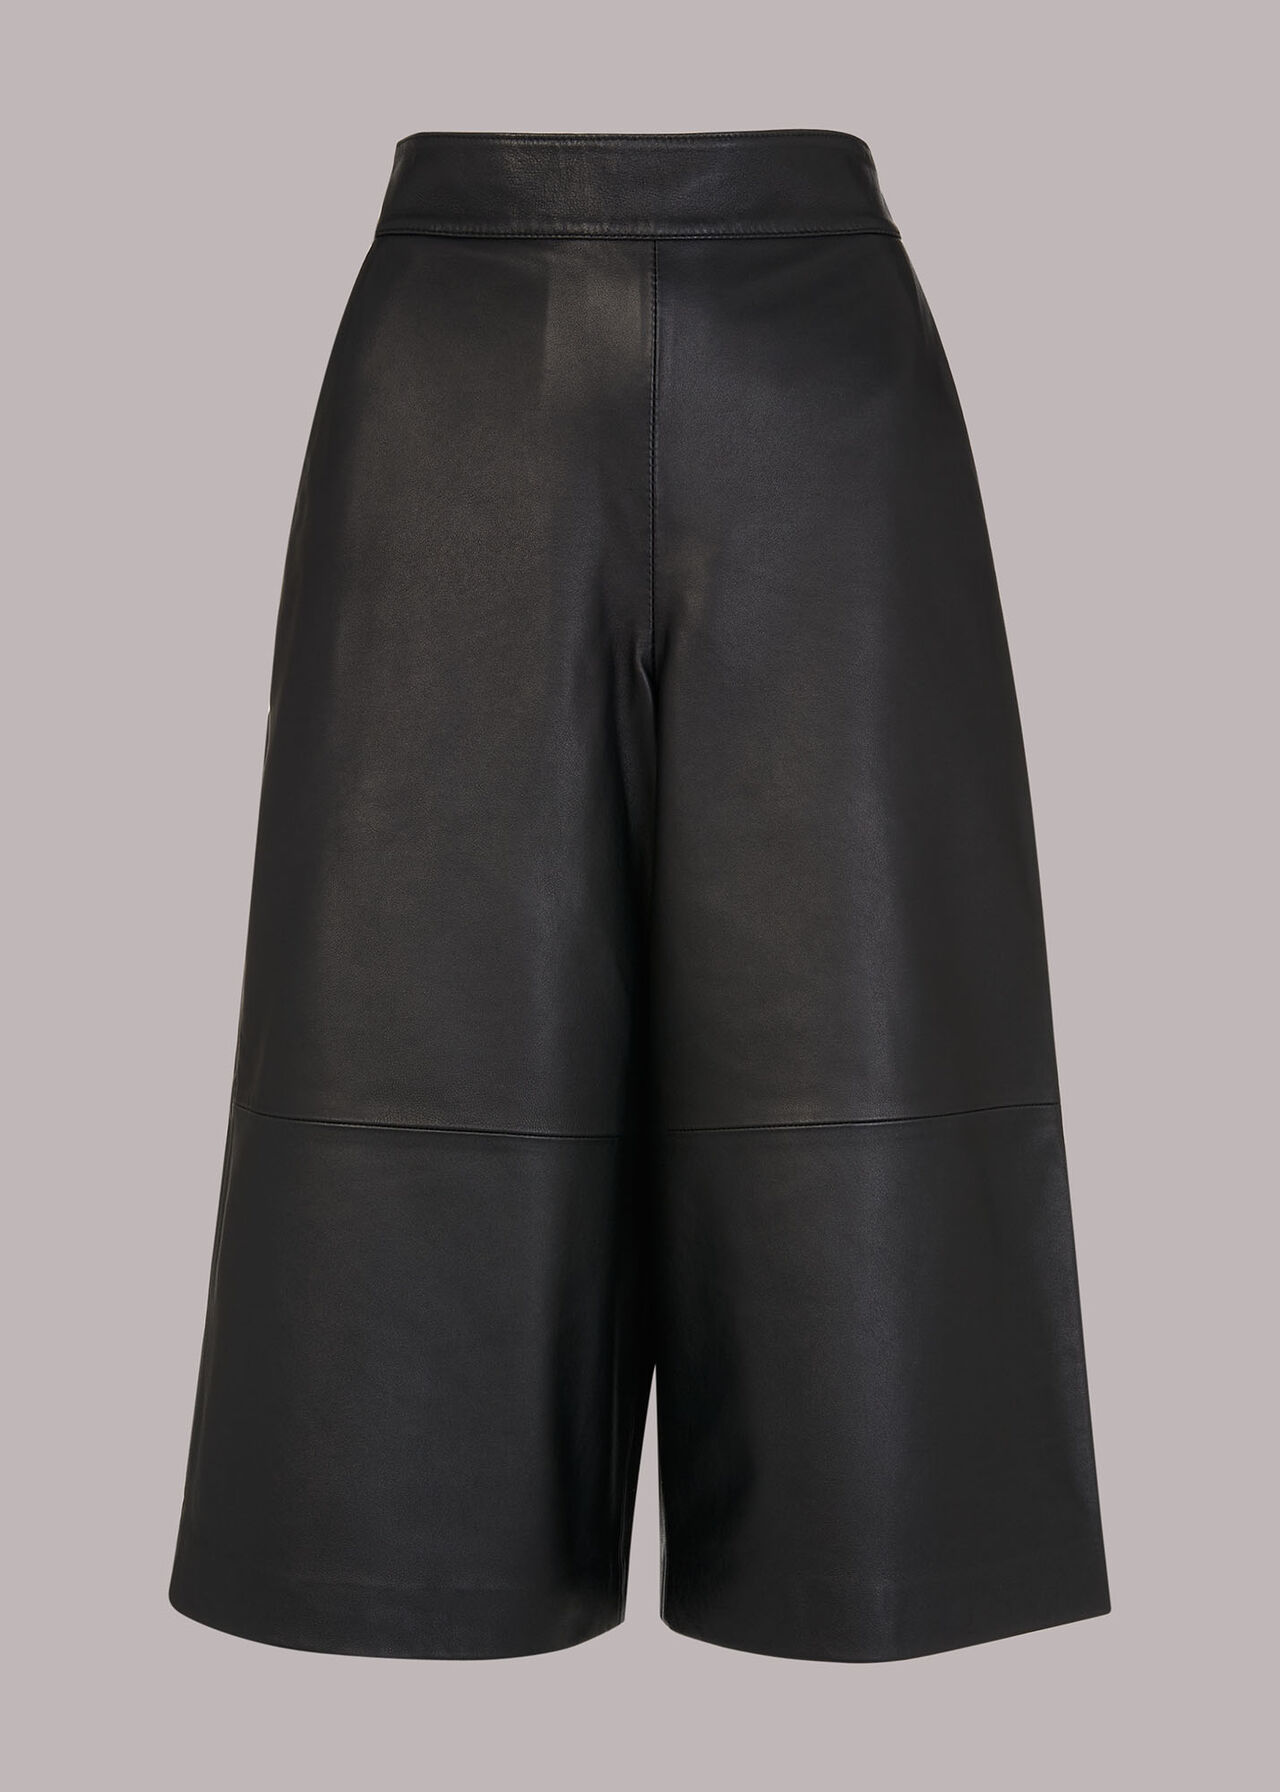 Black Leather Culotte | WHISTLES